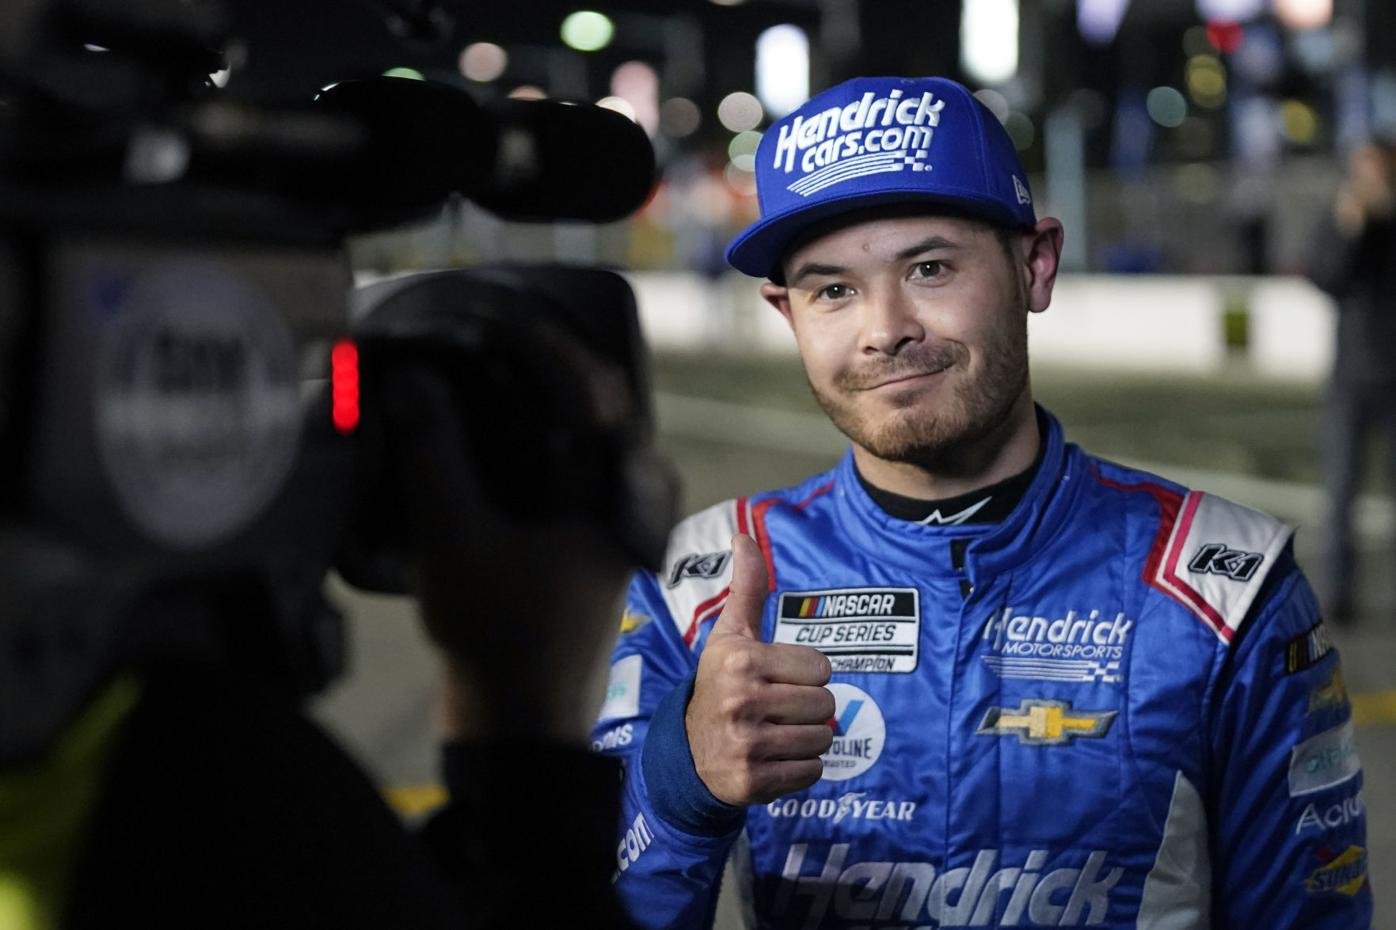 Kyle Larson to promote Tennessee dirt race ahead of Bristol